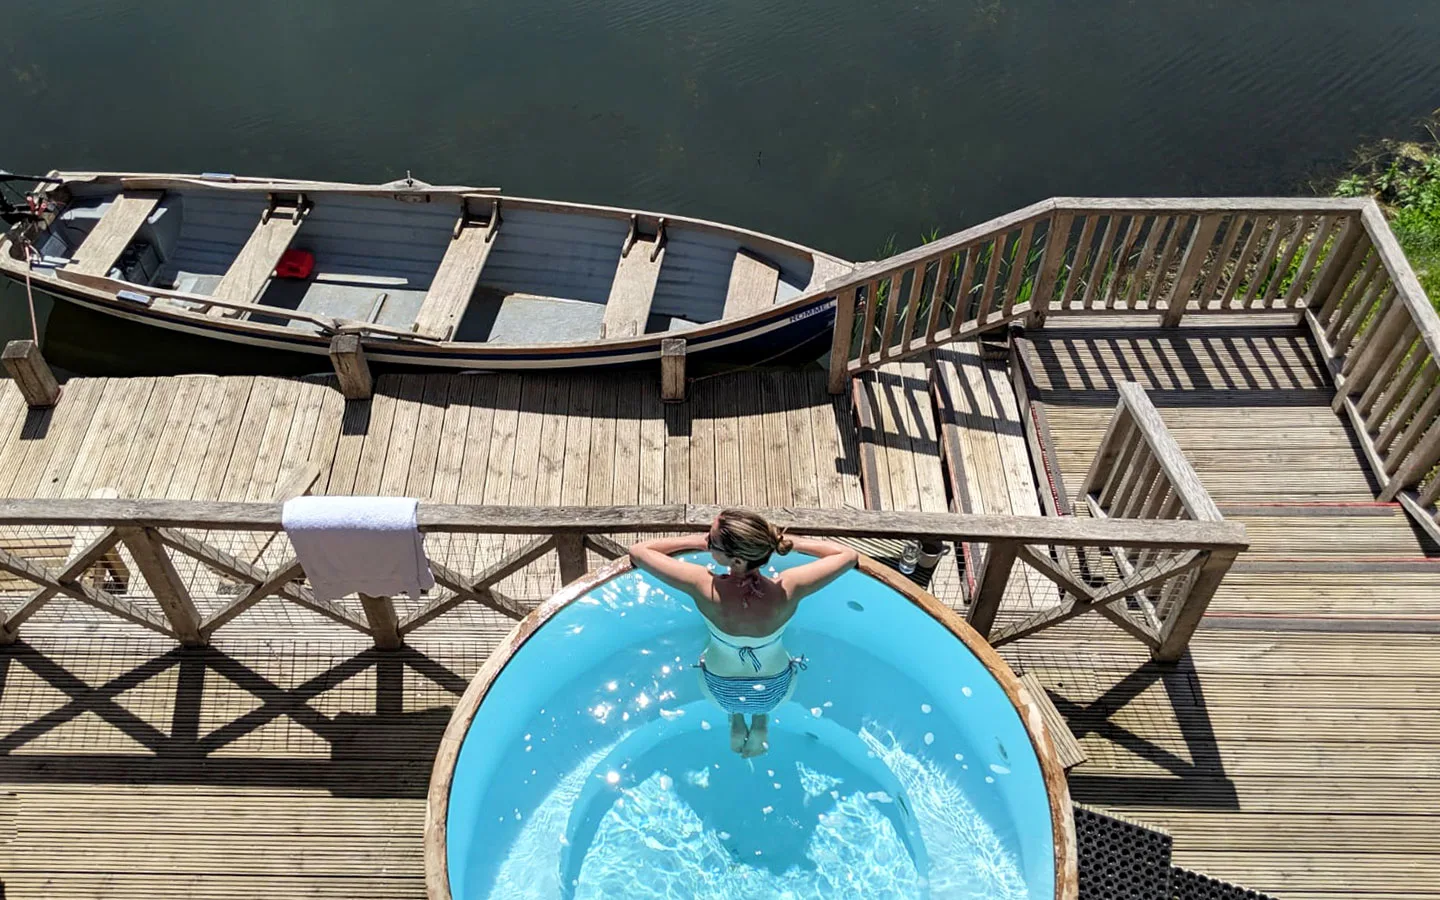 Romantic hot tub break at Log House Holidays in the Cotswolds